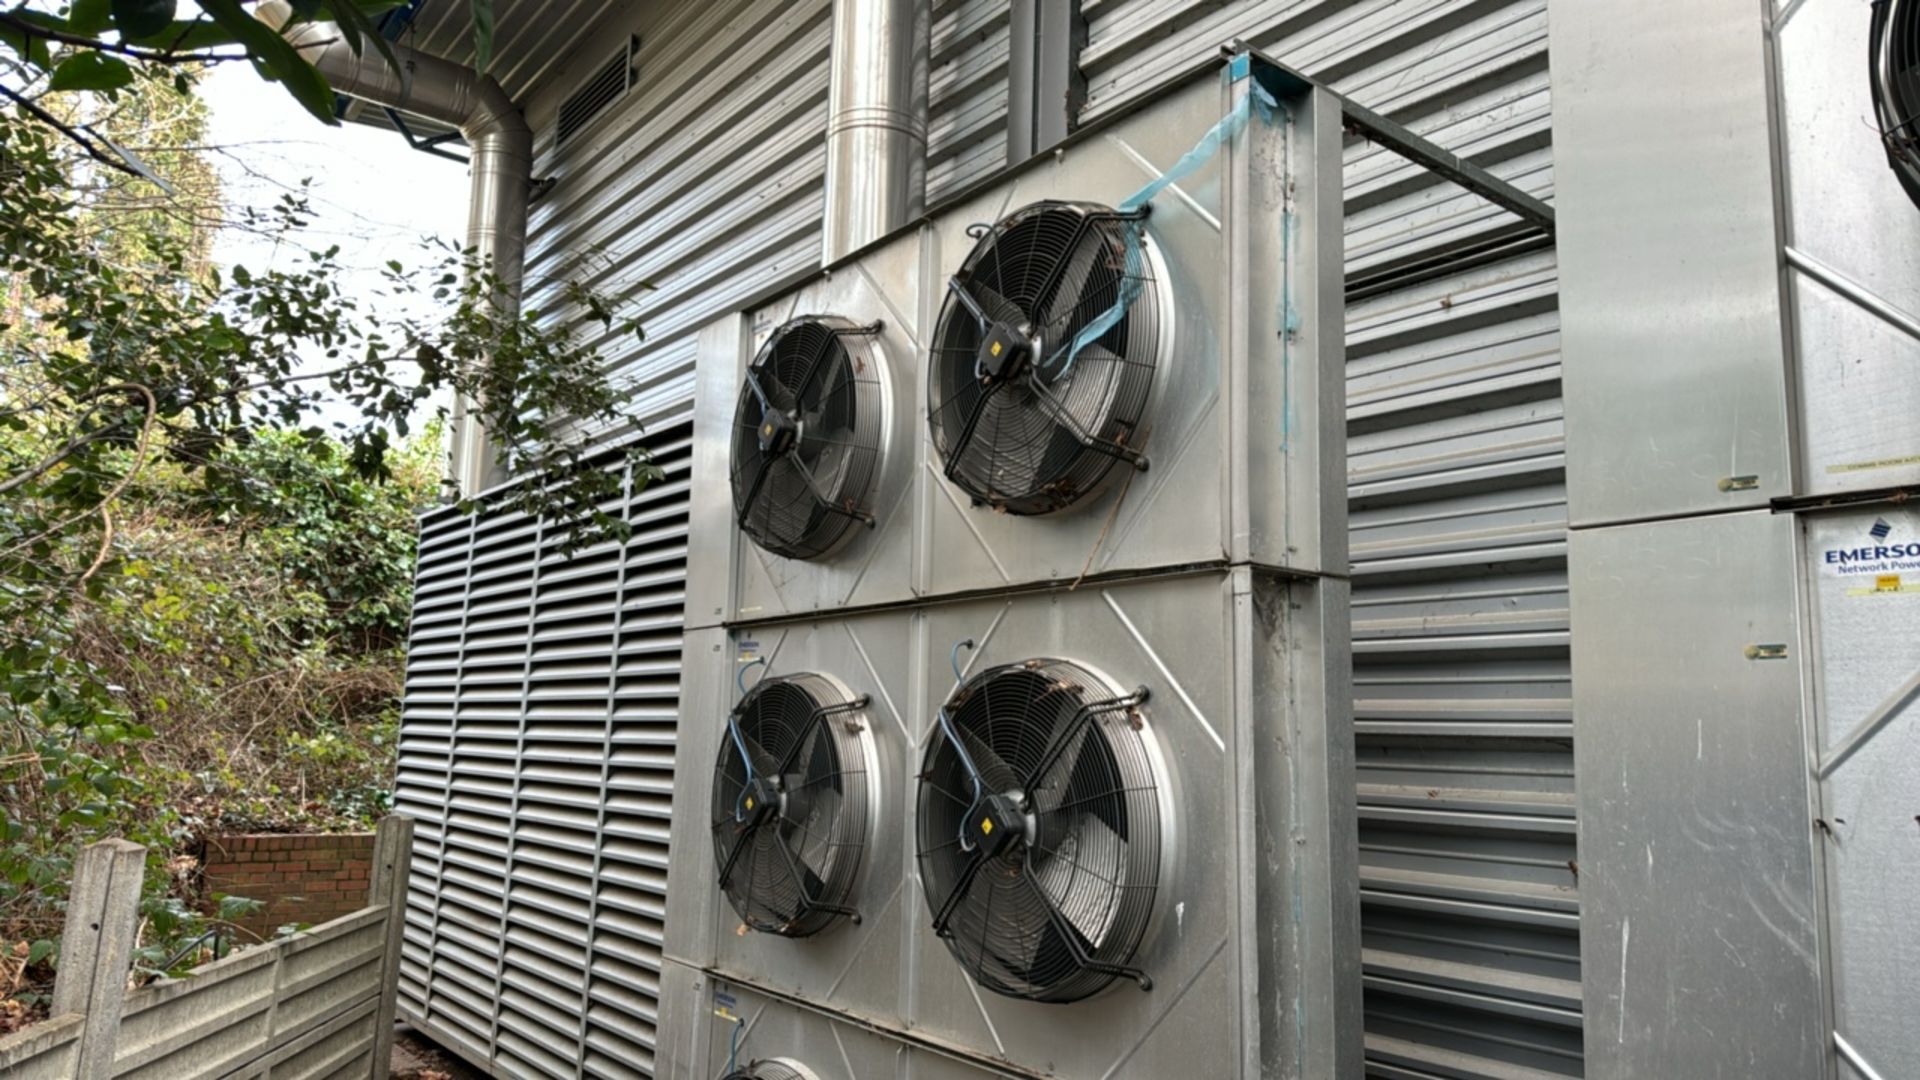 Emerson Network Power External Cooling Fans - Image 3 of 7